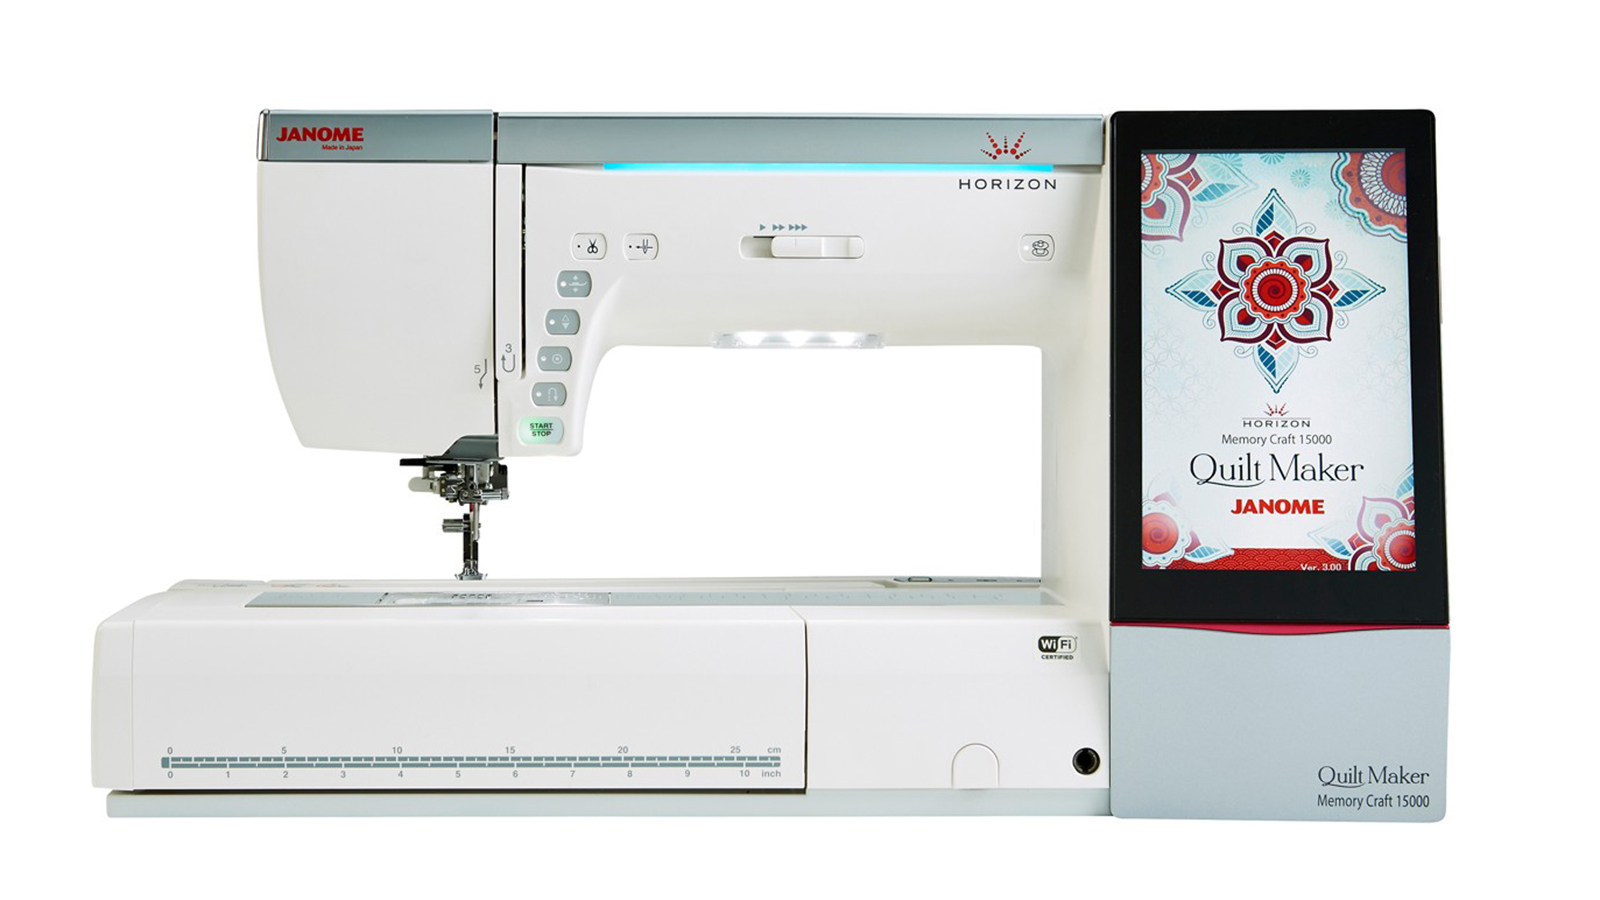 quilting sewing machine